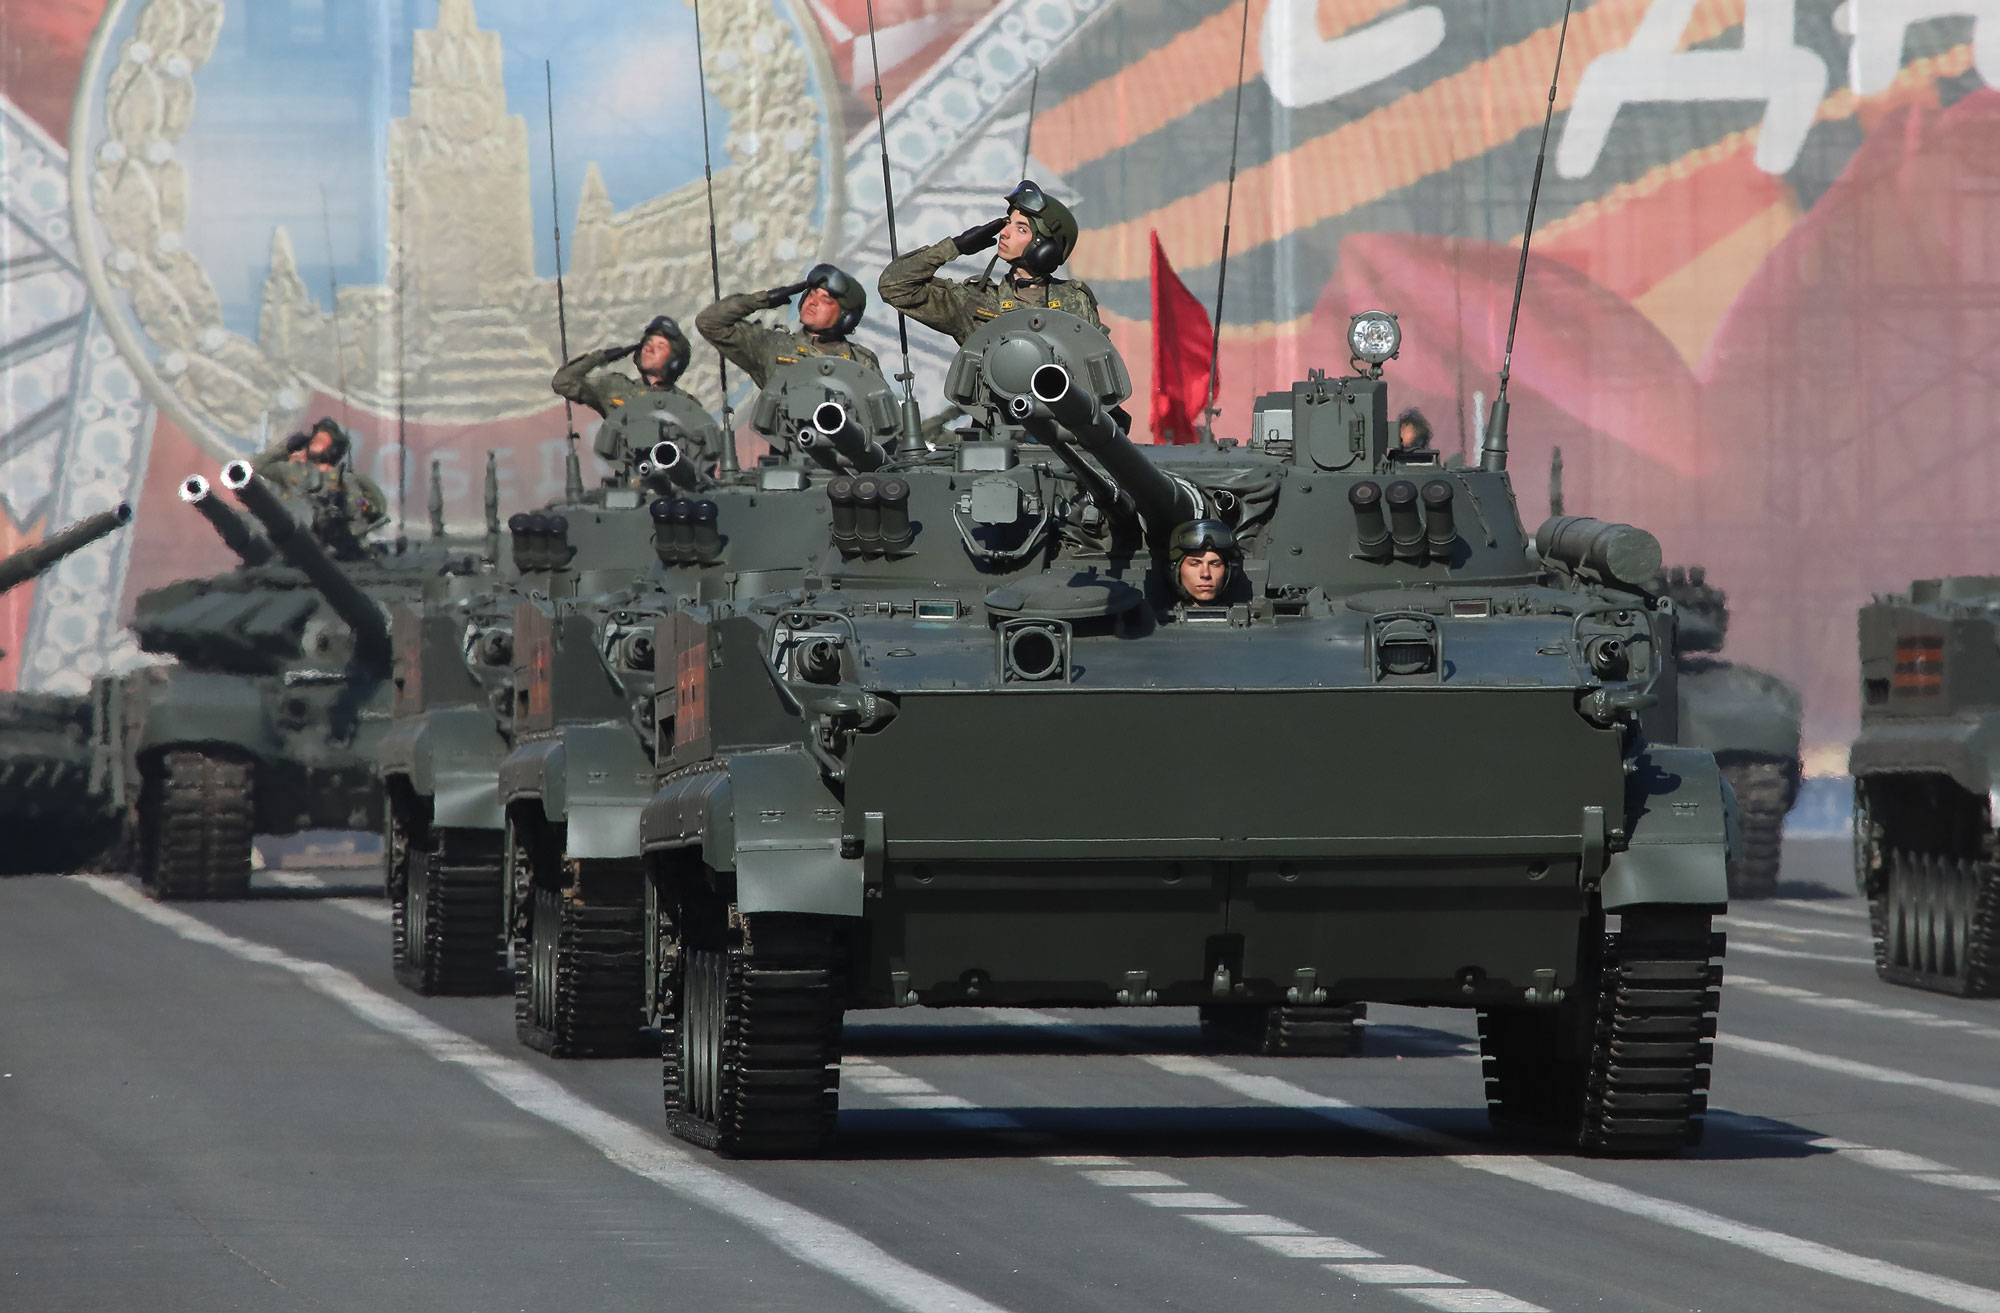 The Russian tanks on parade outside of the Kremlin